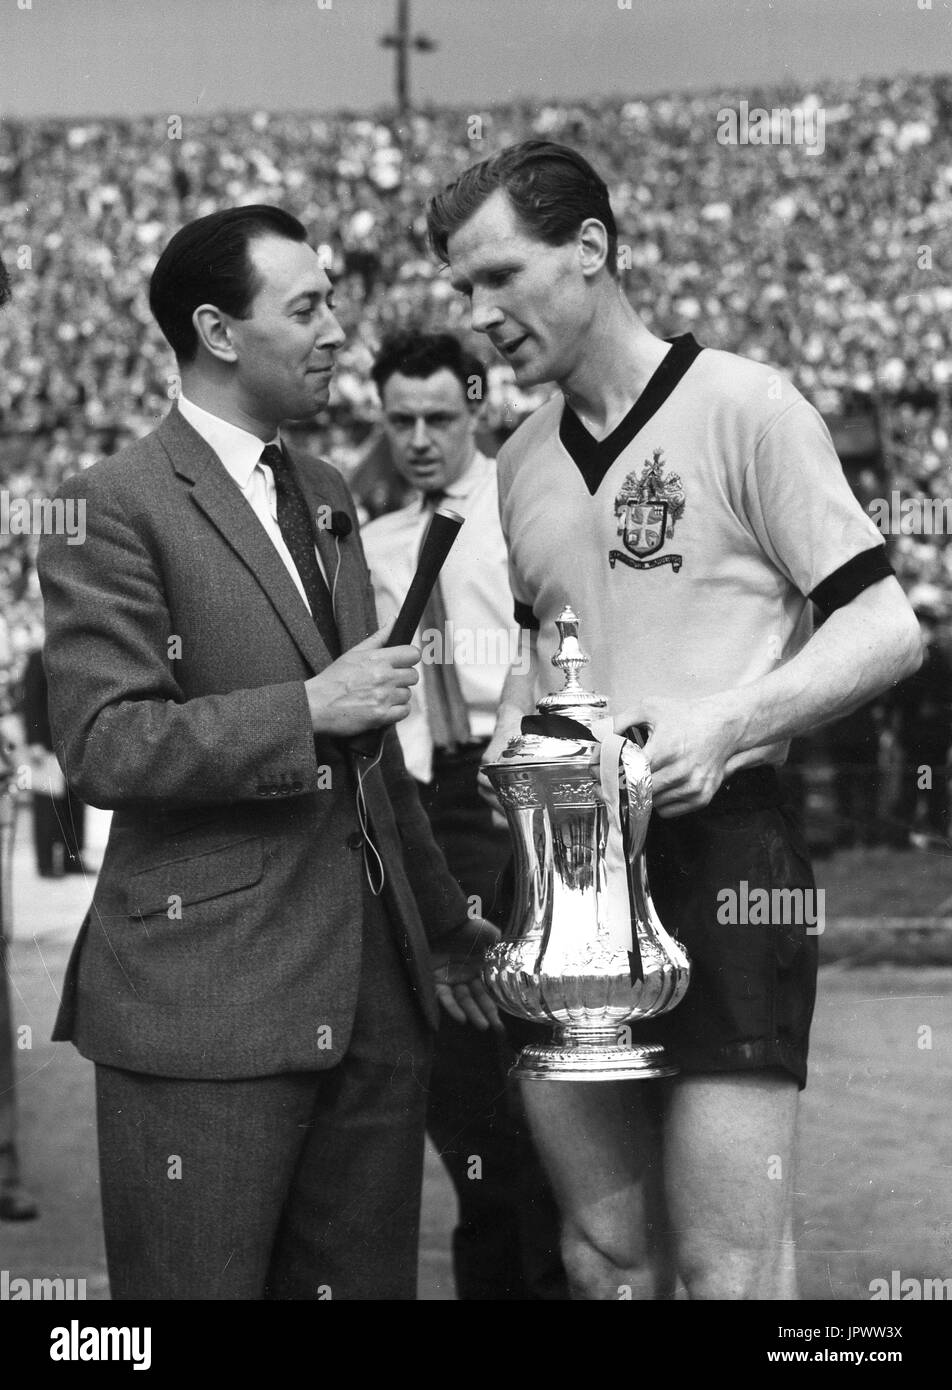 BBC sports commentator and TV presenter David Coleman interviewing FA Cup winning captain Bill Slater of Wolverhampton Wanderers at Wembley in May 1960. Stock Photo